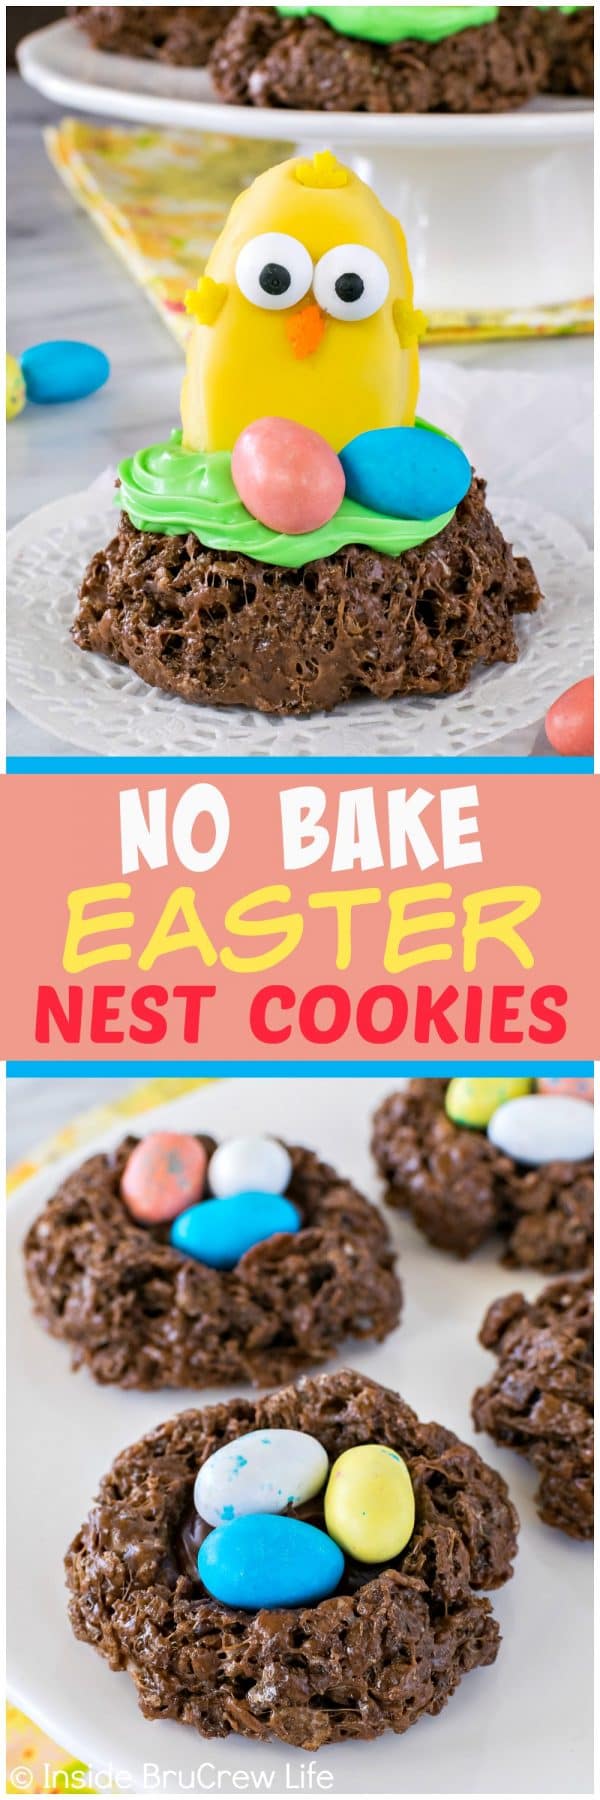 2 pictures of chocolate bird nest cookies topped with candy eggs.